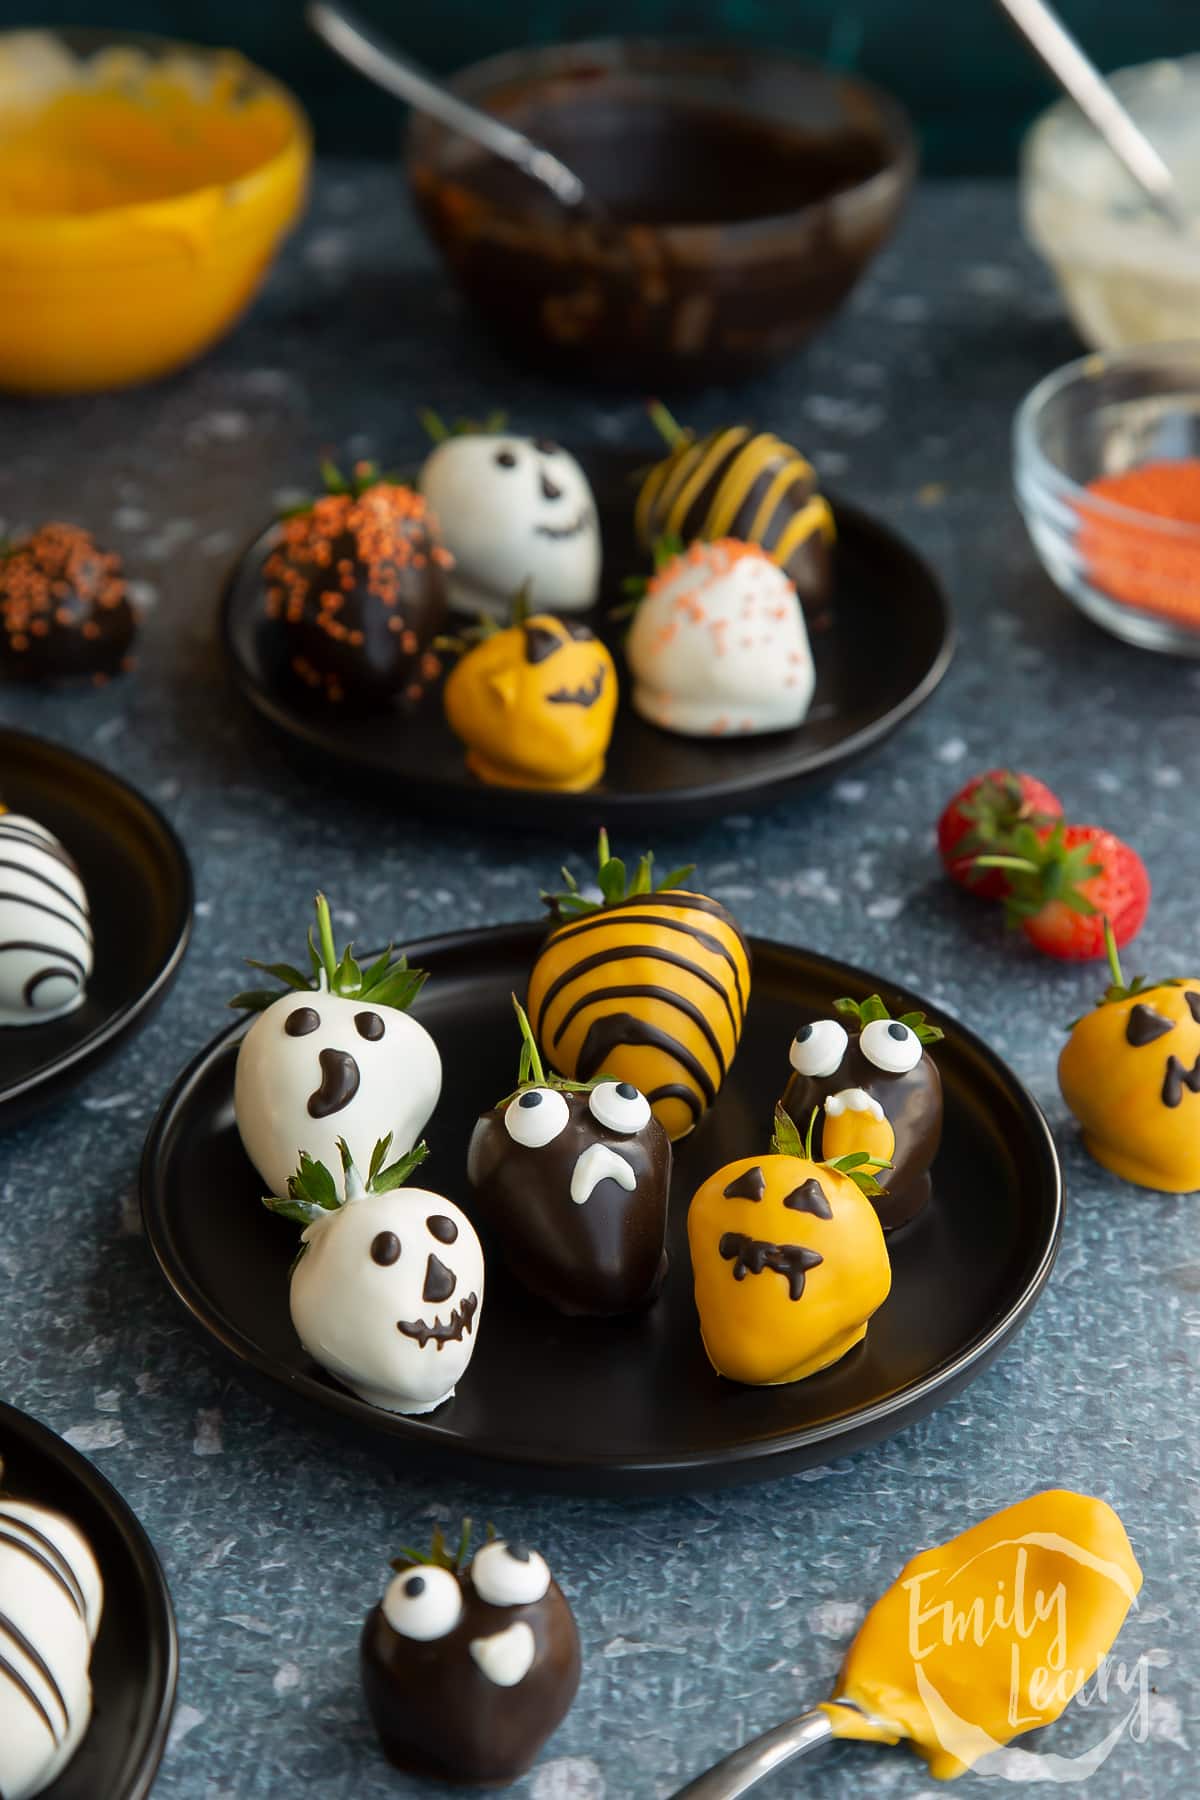 A finished plate of halloween chocolate covered strawberries.